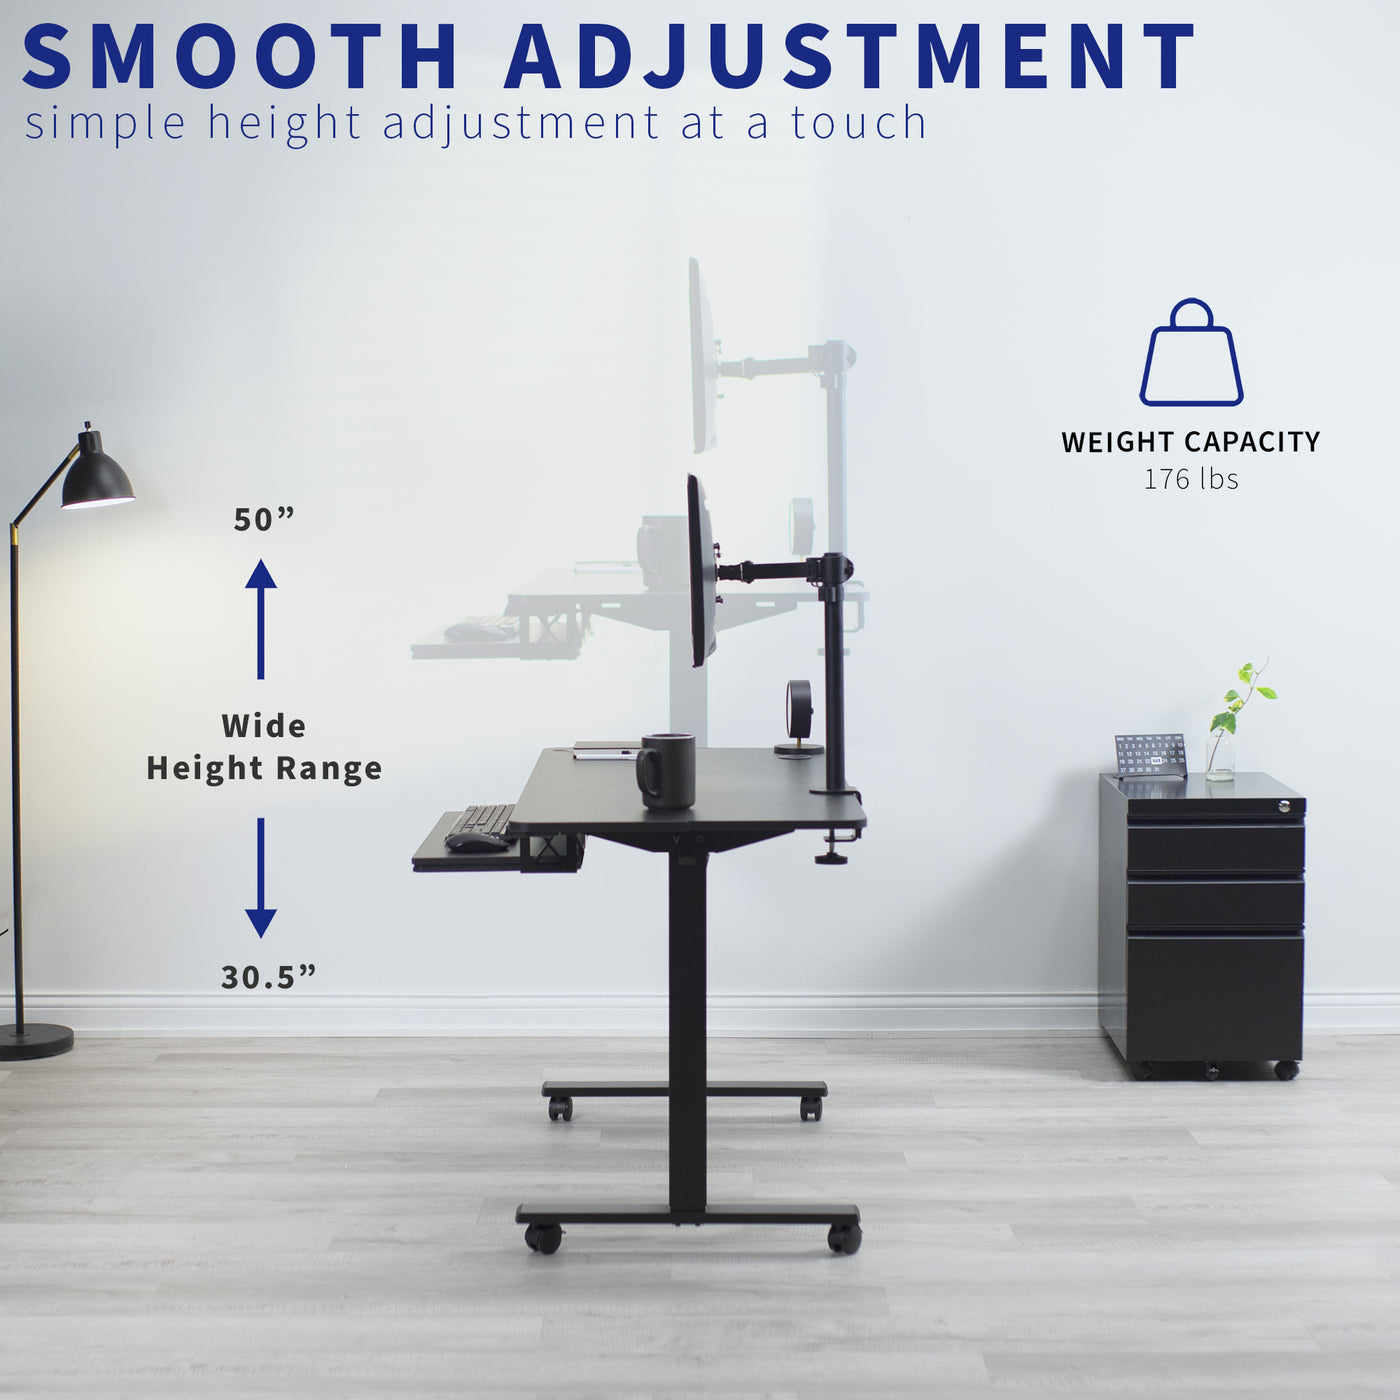 Sturdy mobile electric sit to stand height adjustable ergonomic desk workstation with keyboard tray and accessory hooks for convenient productive workspace.